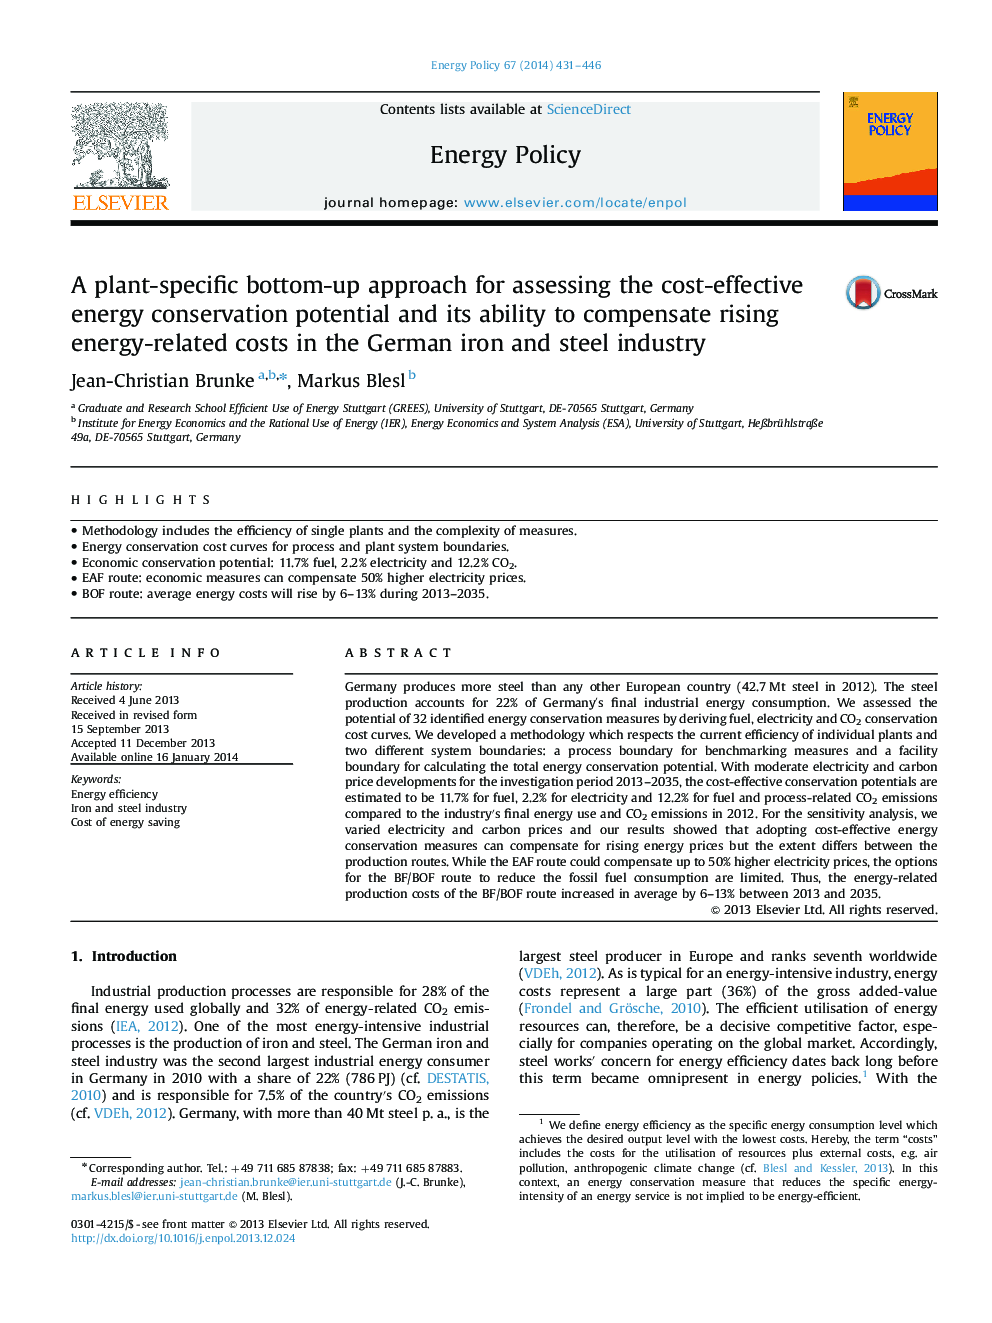 A plant-specific bottom-up approach for assessing the cost-effective energy conservation potential and its ability to compensate rising energy-related costs in the German iron and steel industry